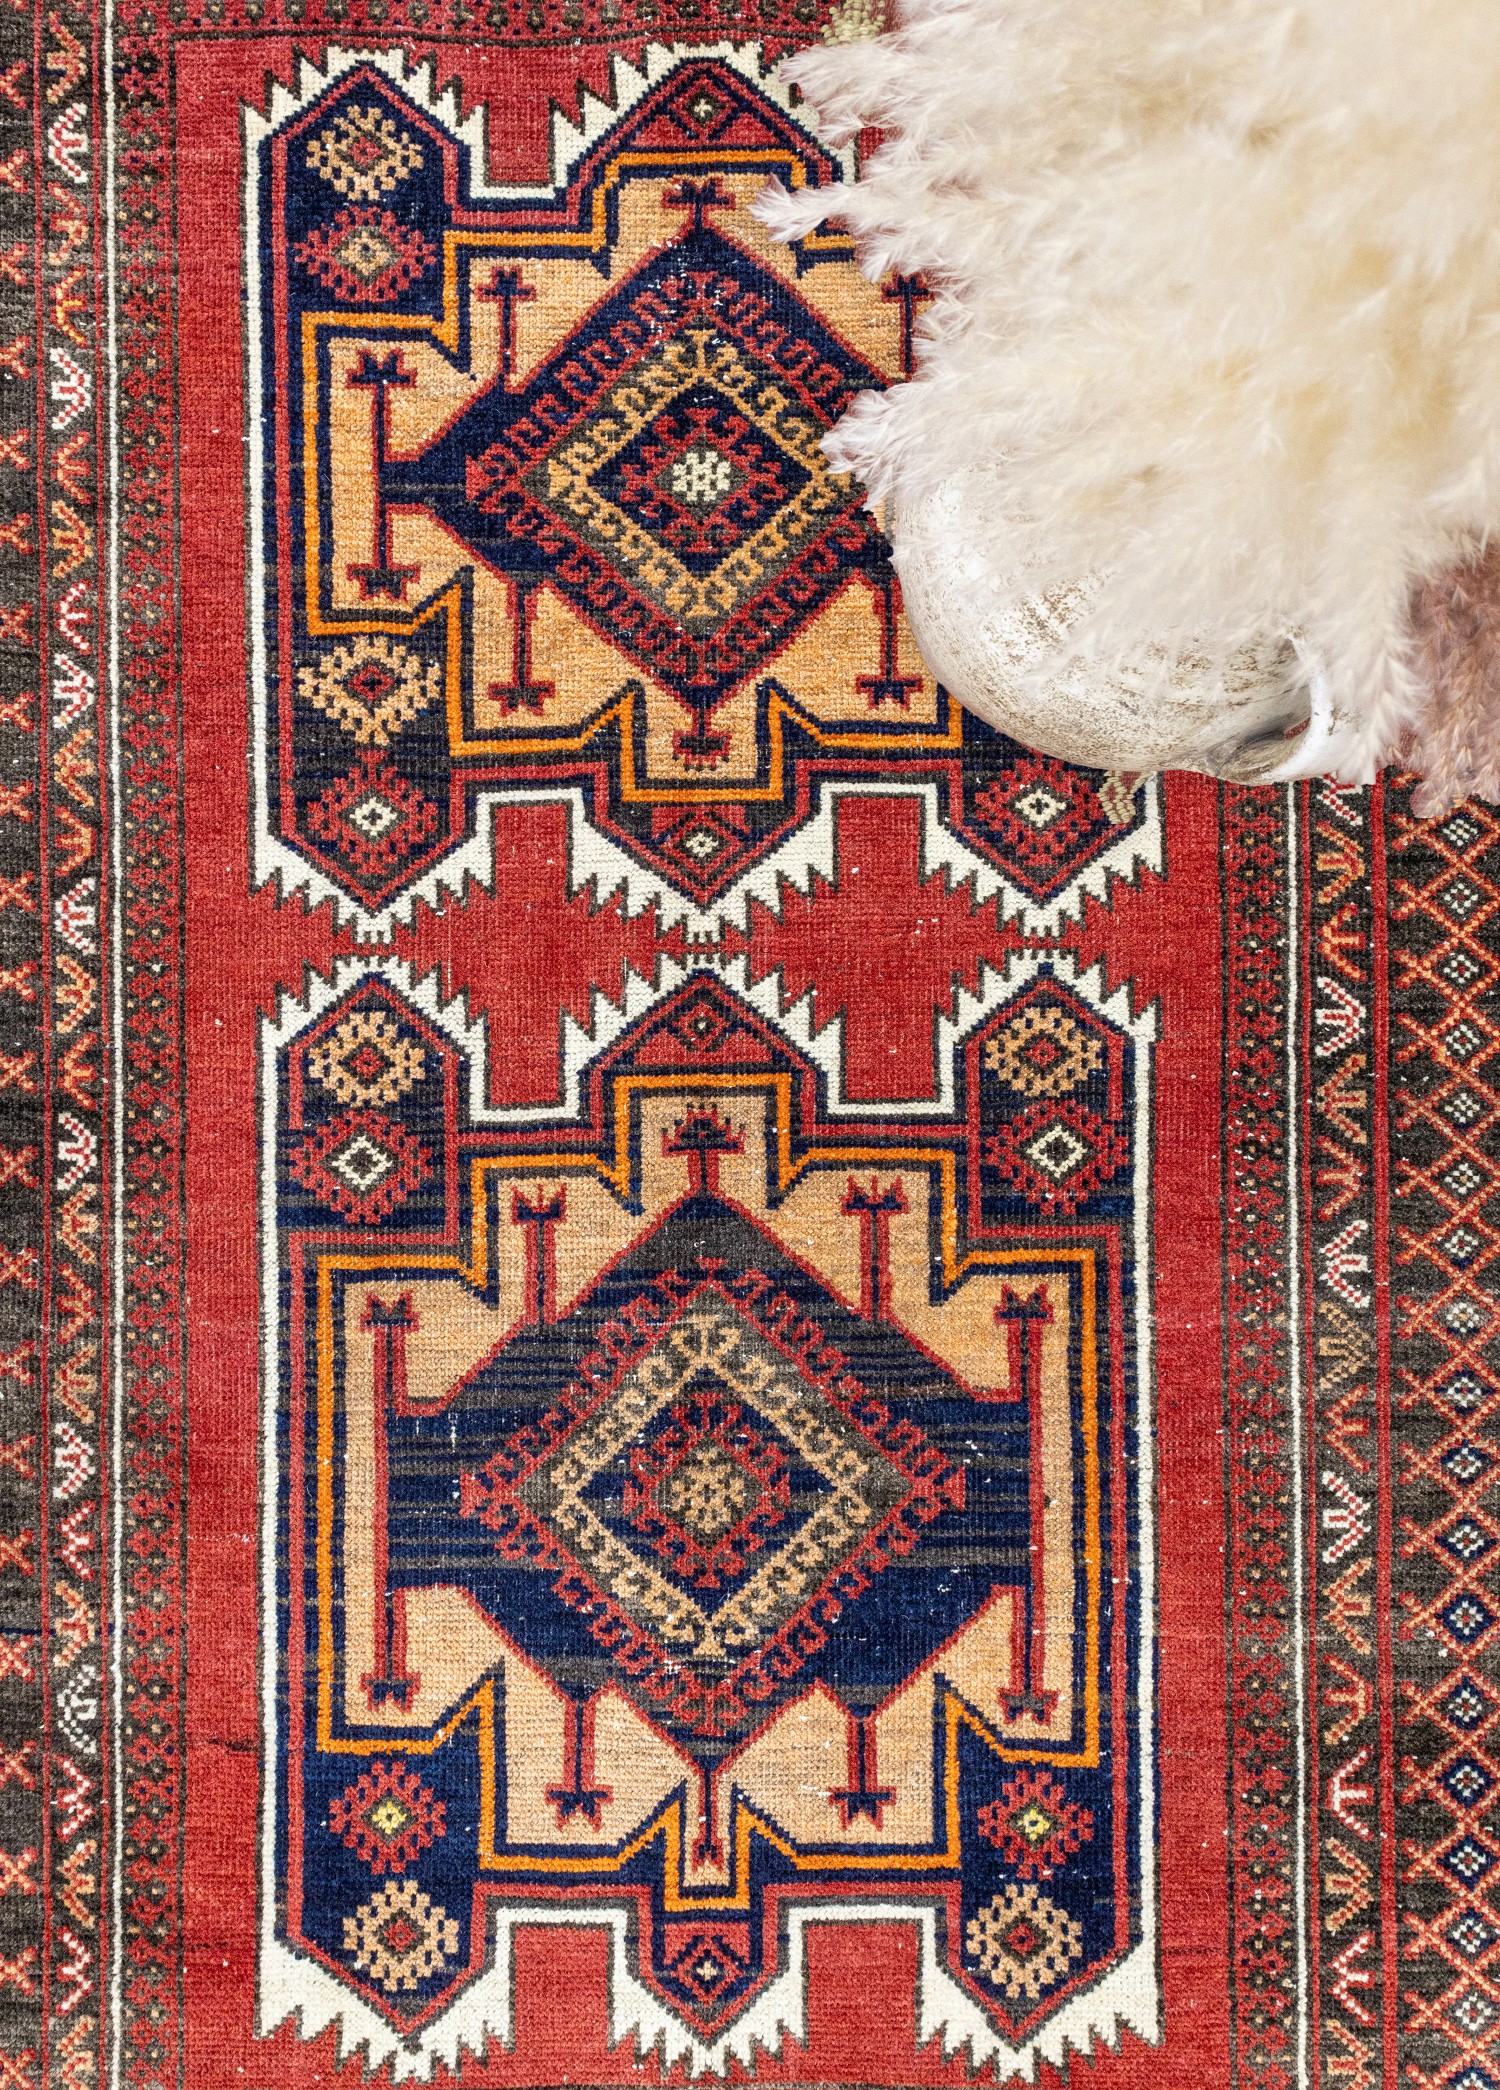 To Which Regions Do Ethnic Rug Types Belong?